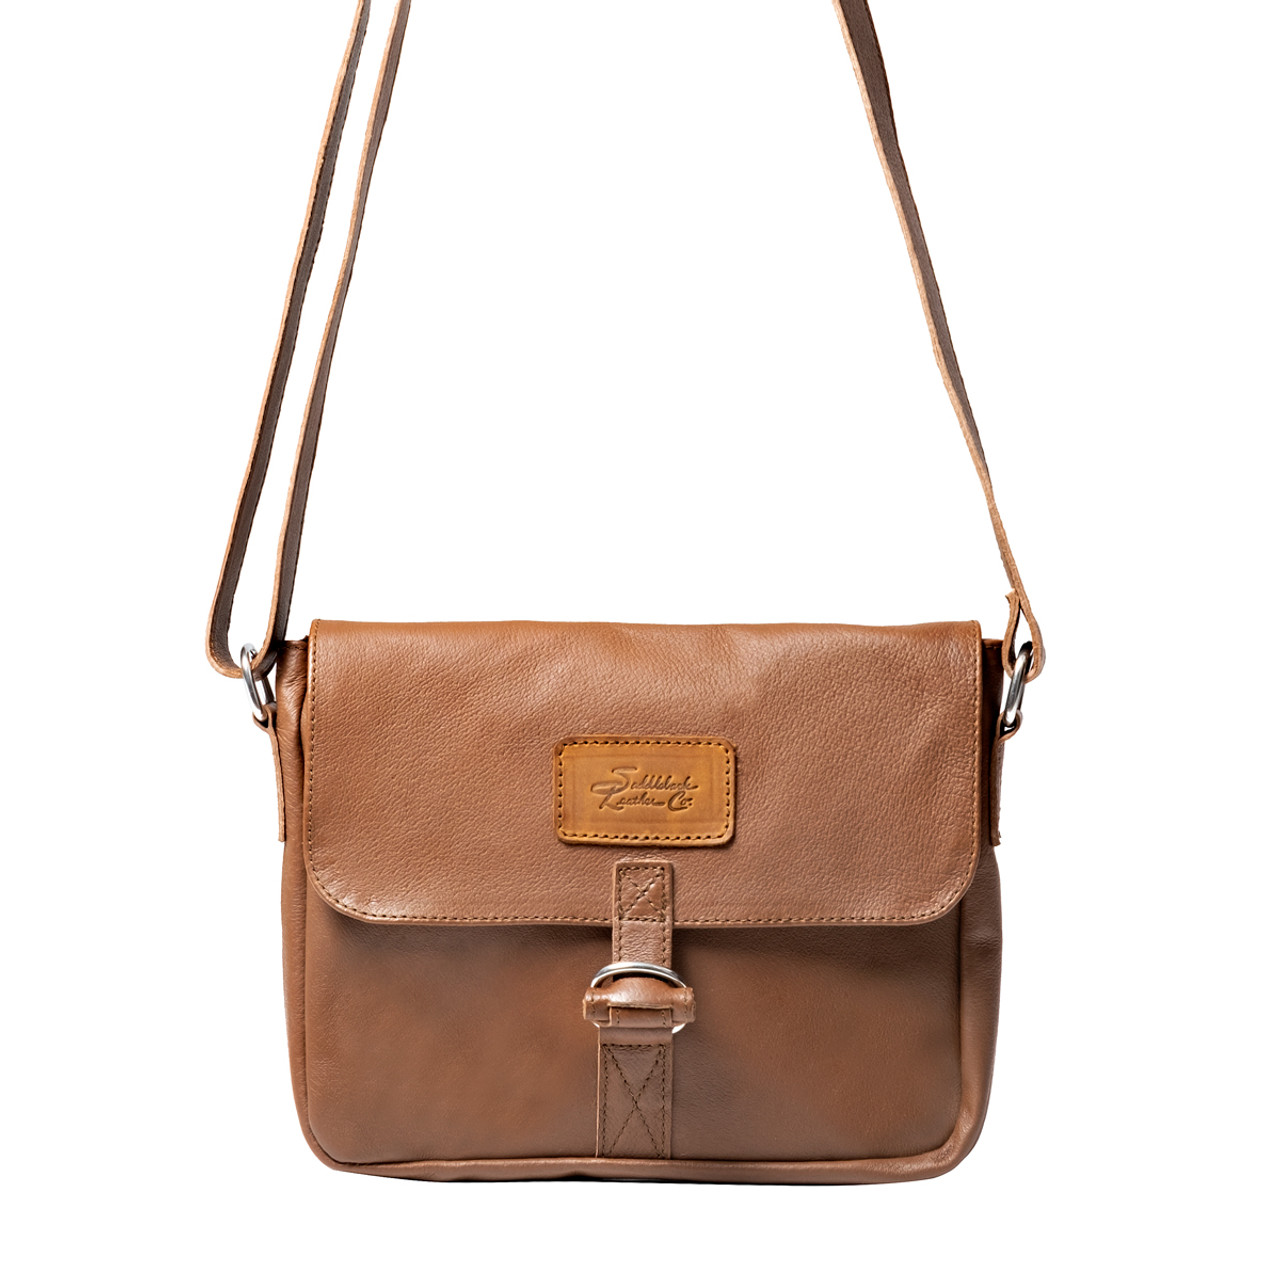 Lightweight Leather Satchel | Tough and Real Quality | Saddleback